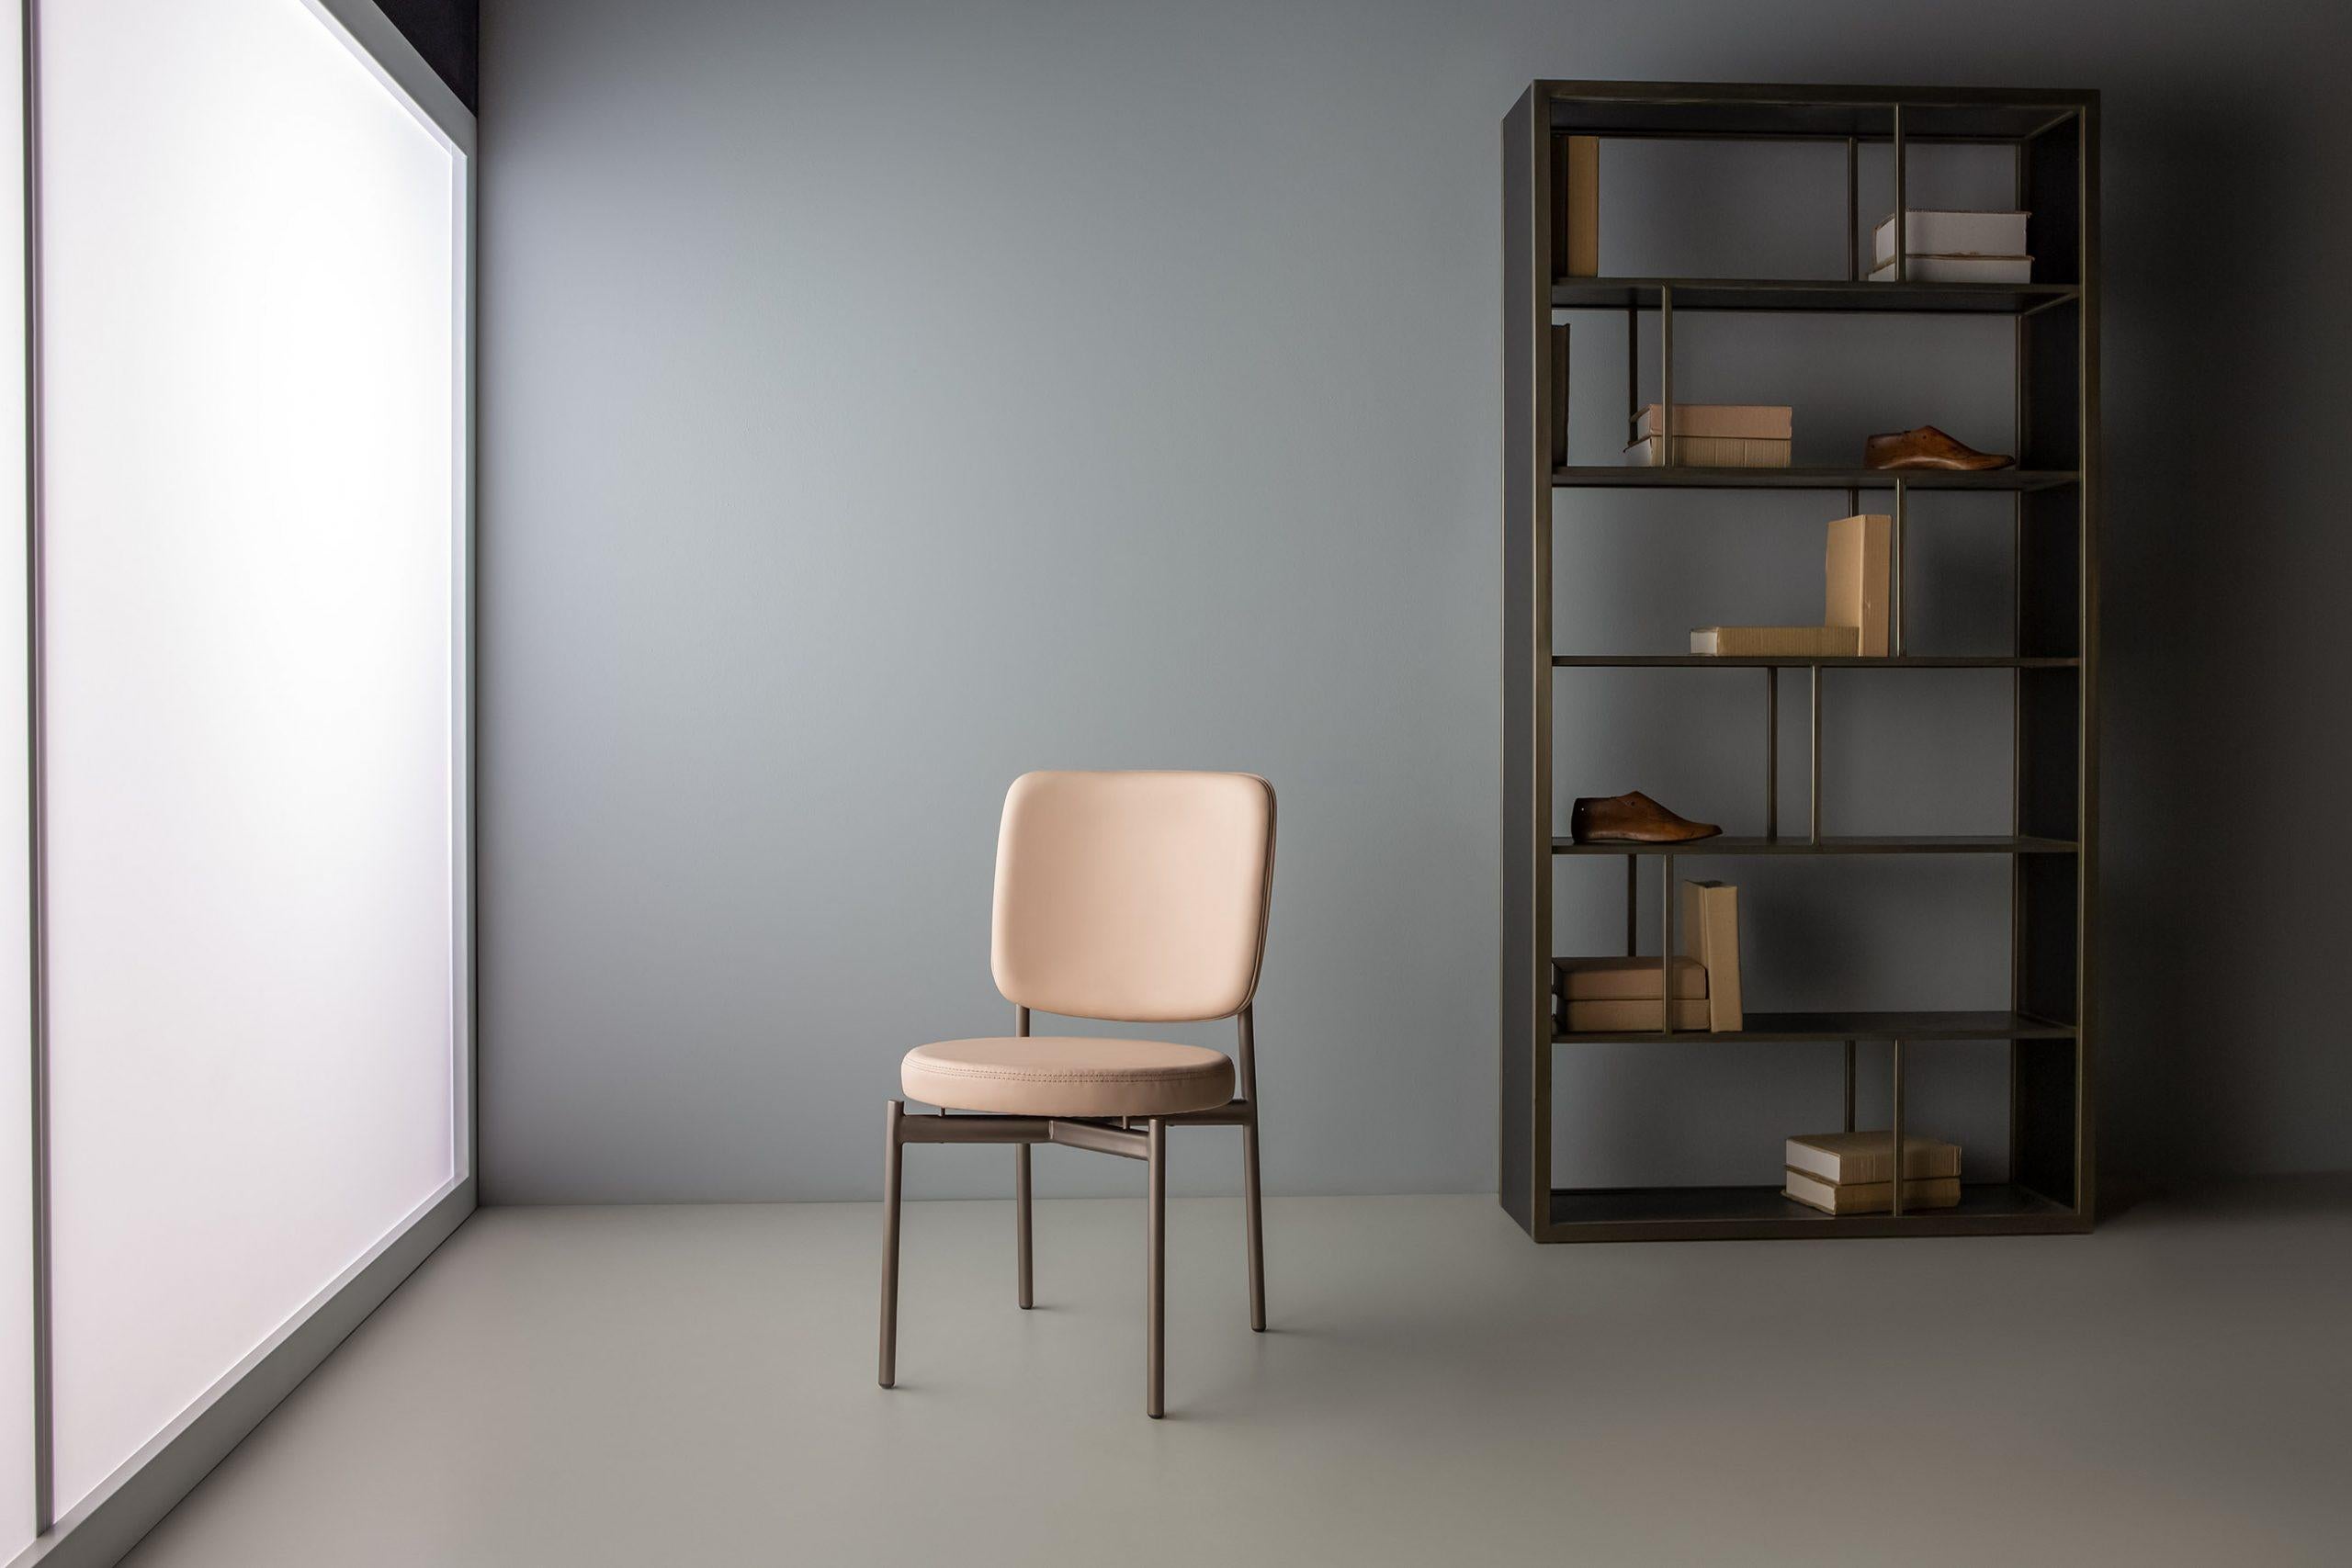 Jean Uni Chair by Doimo Brasil
Dimensions: W 46 x D 57 x H 83 cm 
Materials: Metal, Upholstered seat.


With the intention of providing good taste and personality, Doimo deciphers trends and follows the evolution of man and his space. To this end,